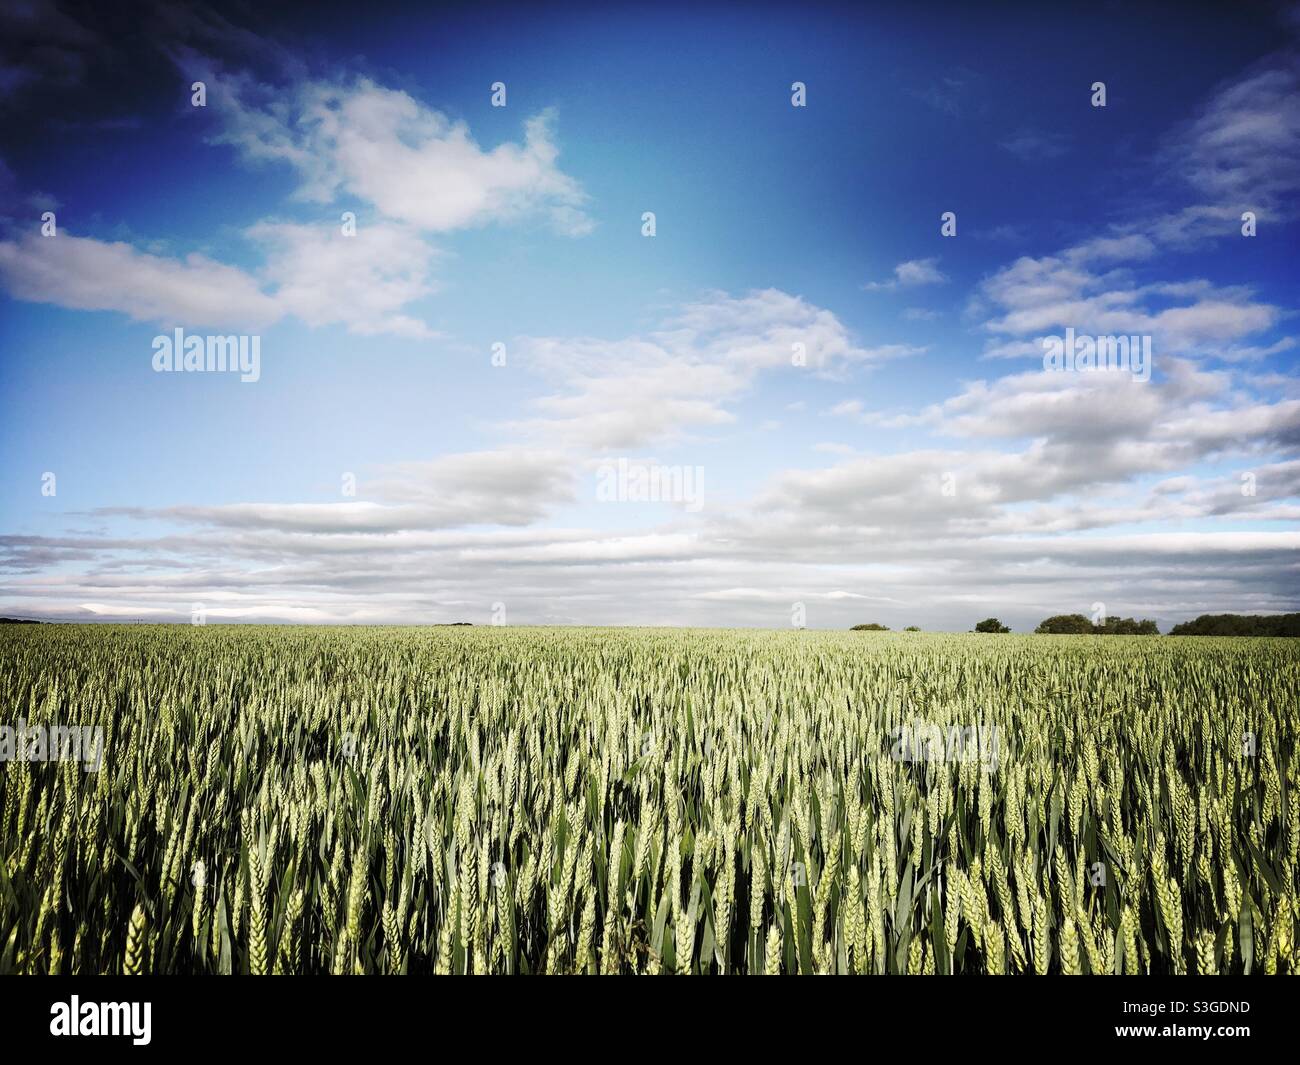 Field of wheat in summer, North Yorkshire, United Kingdom Stock Photo